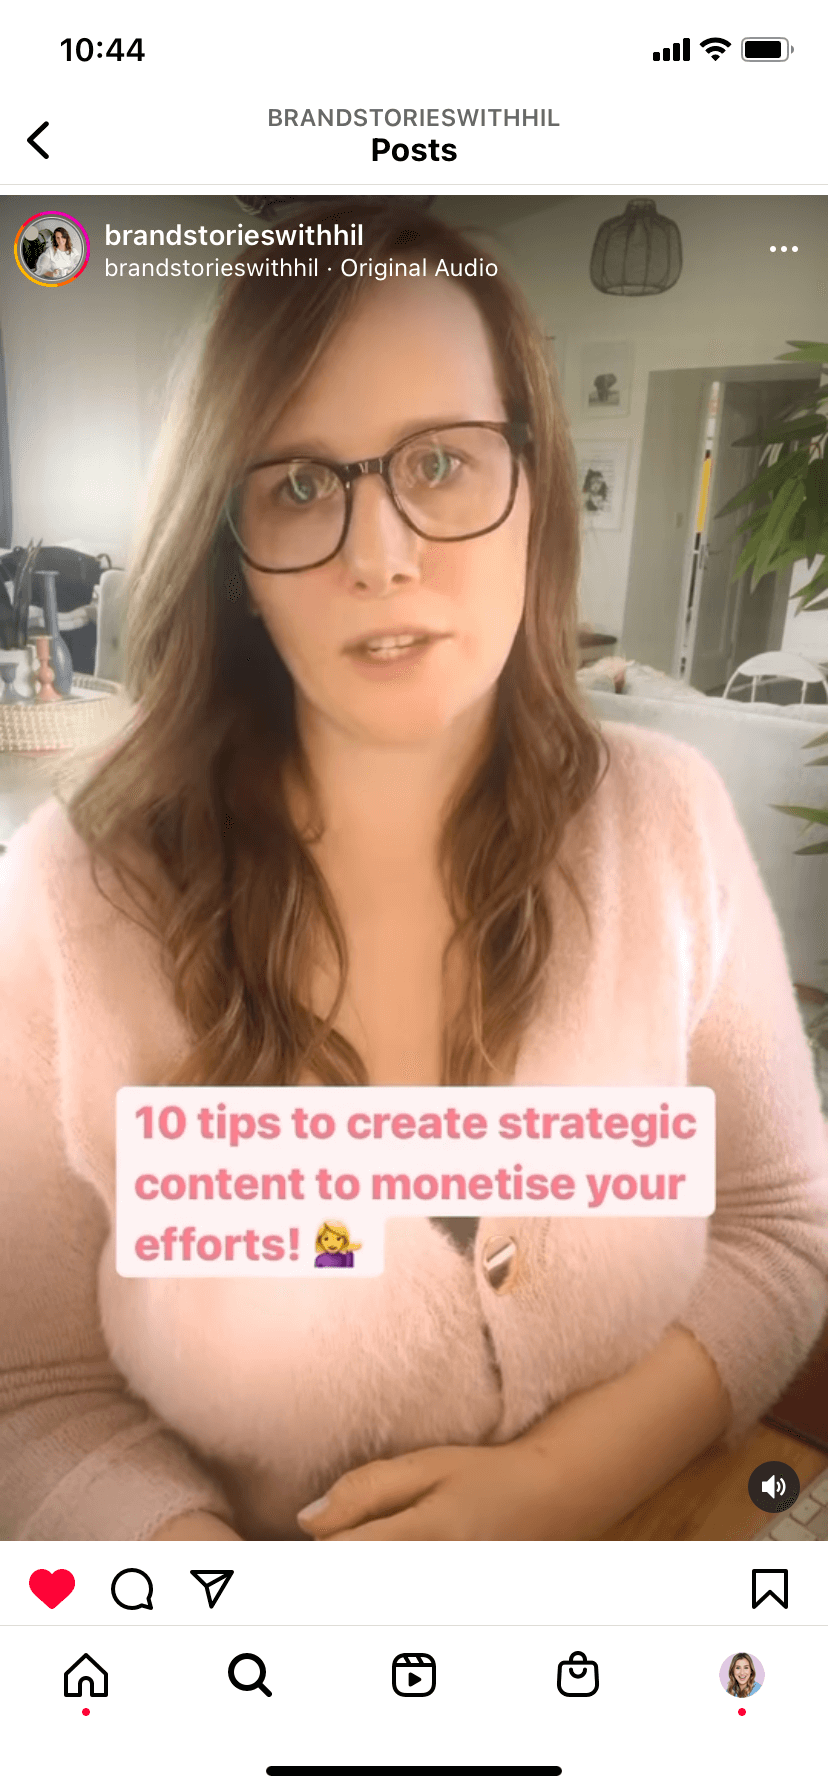 screenshot of Hillary's reel with text 10 tips to create strategic content to monetise your efforts.